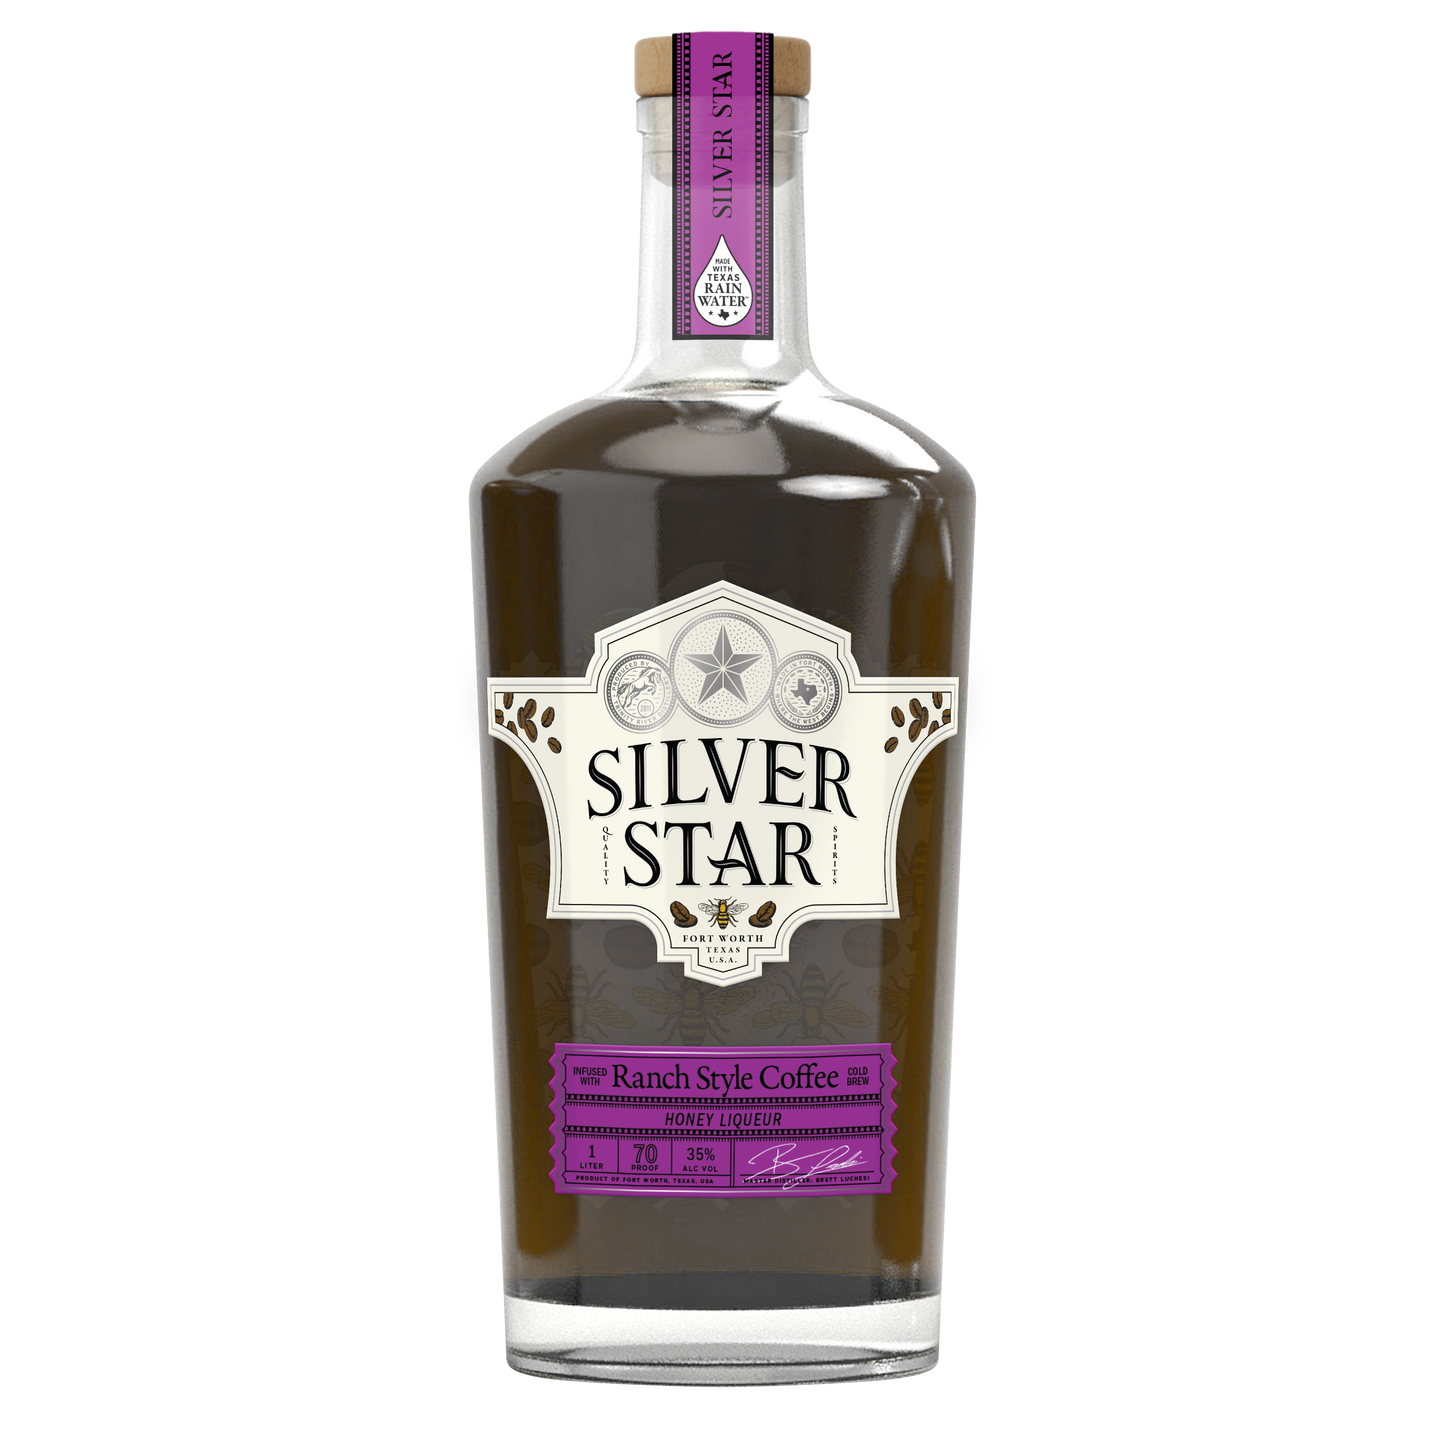 TEXAS SILVER STAR RANCH STYLE COFFEE WHISKEY